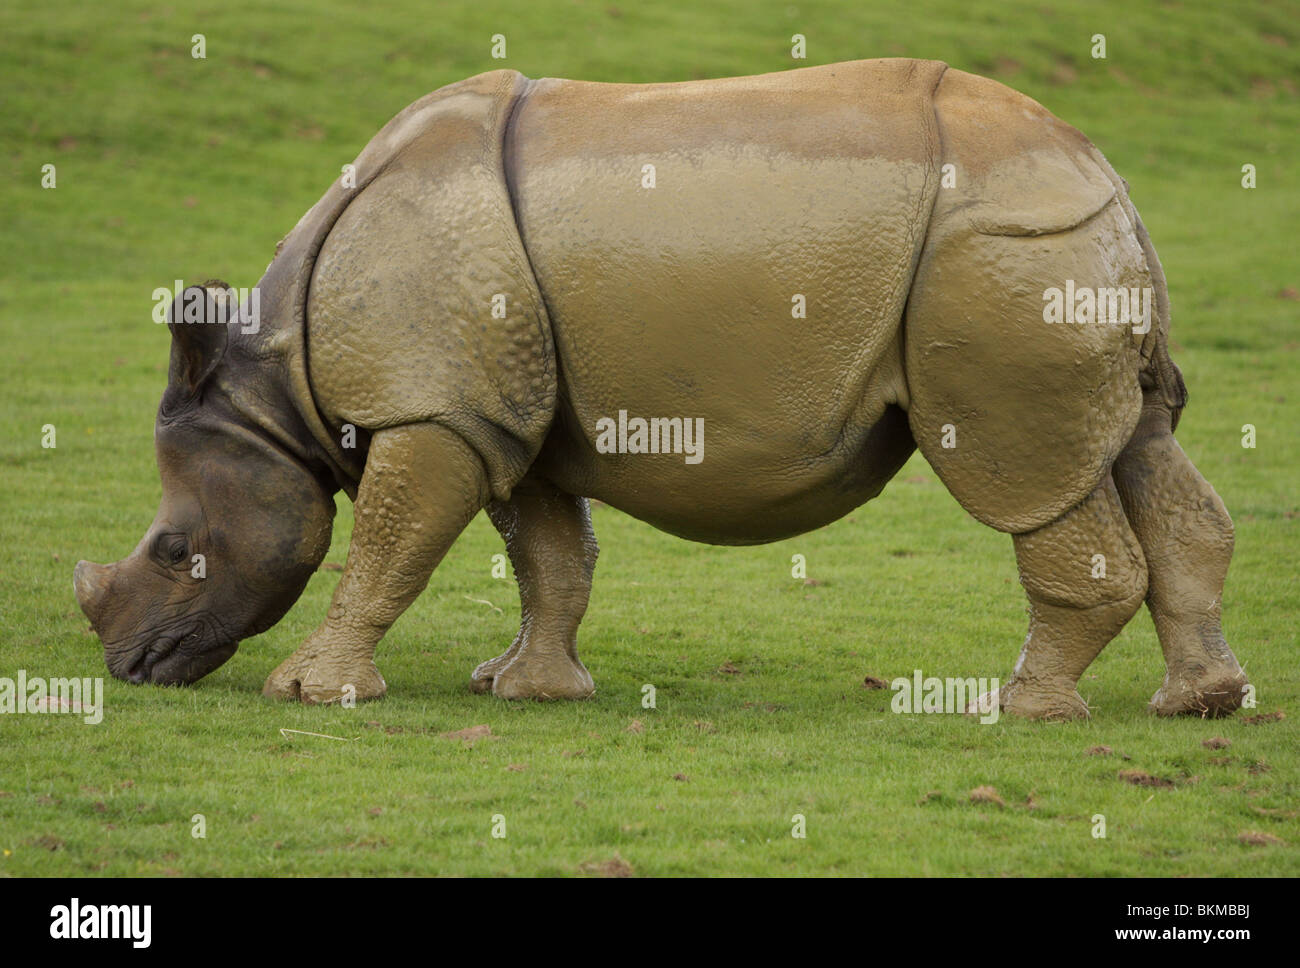 An Asian rhinocerous eating grass after walking in mud Stock Photo